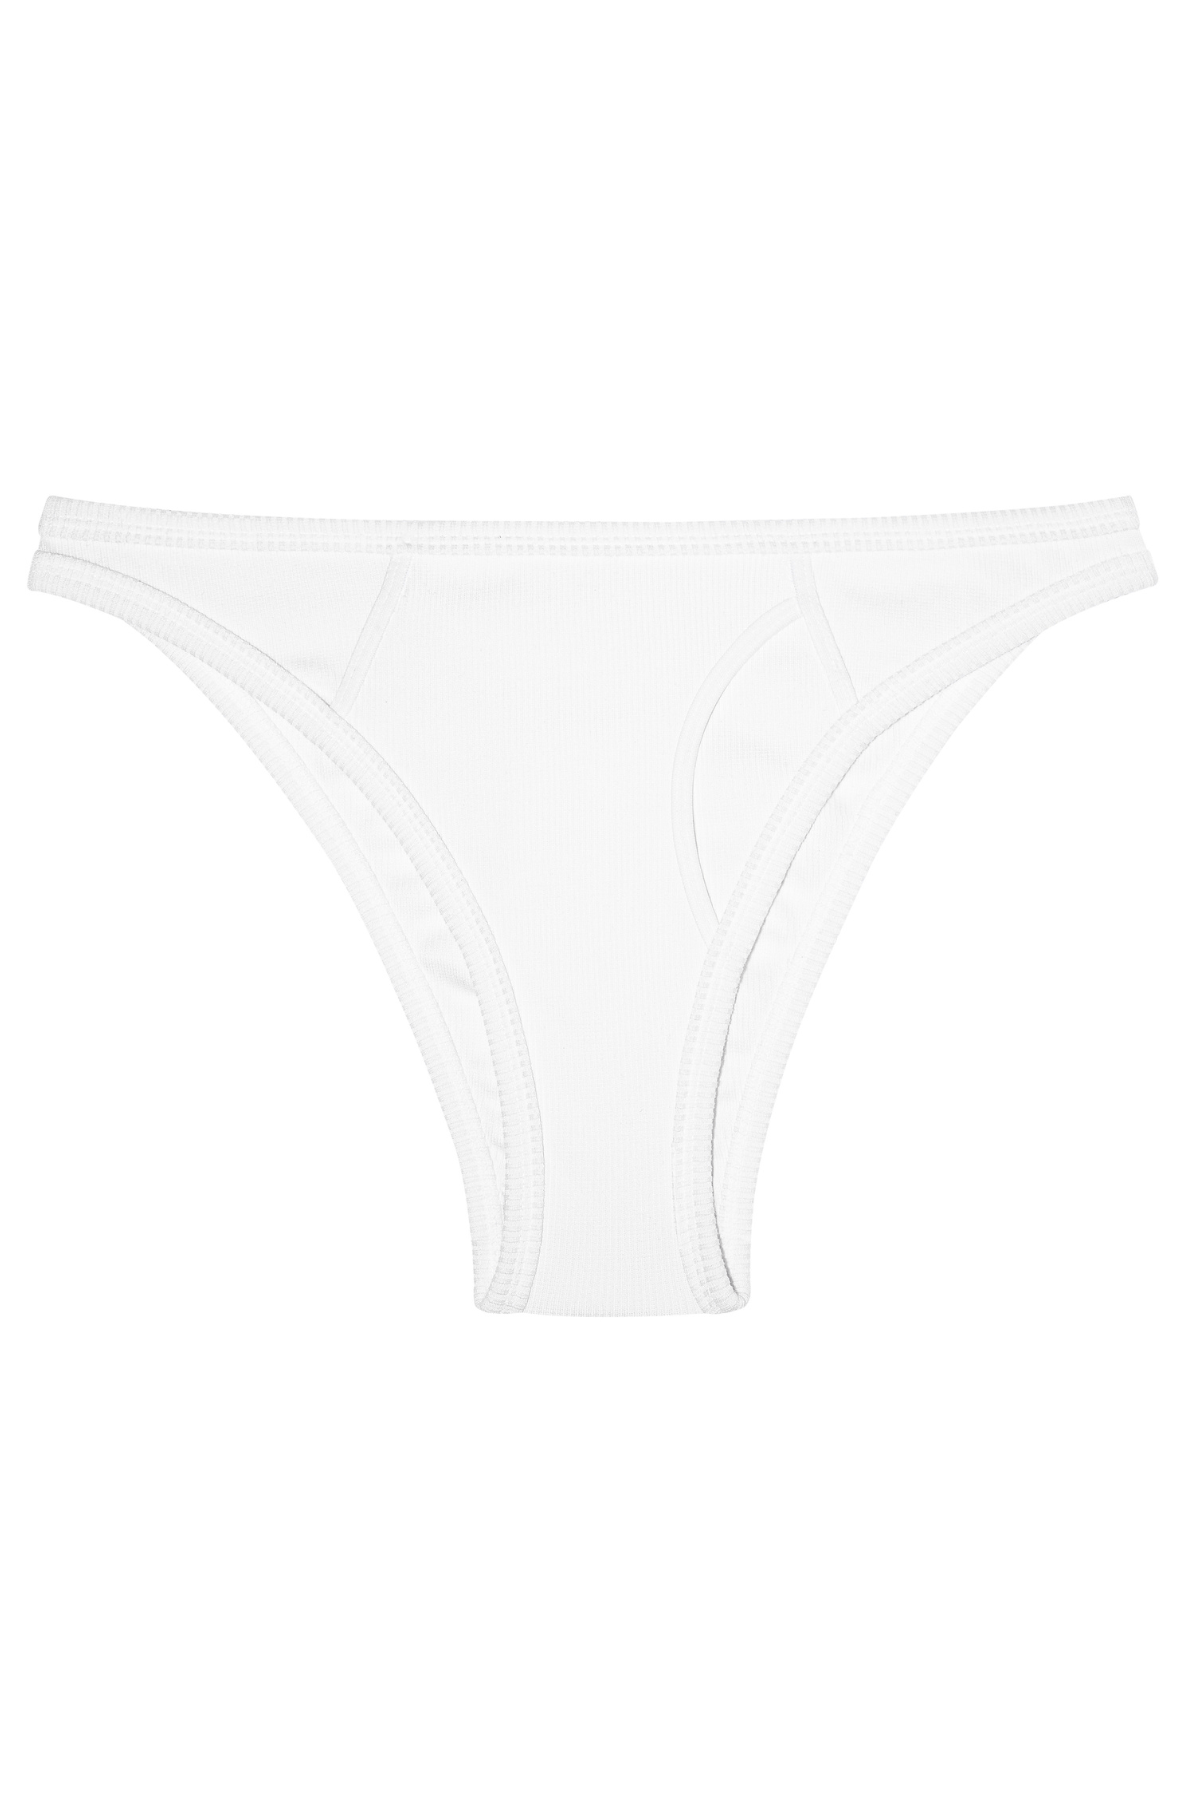 MIMOSA Briefs with Frills and Silk – Le Petit Trou EN